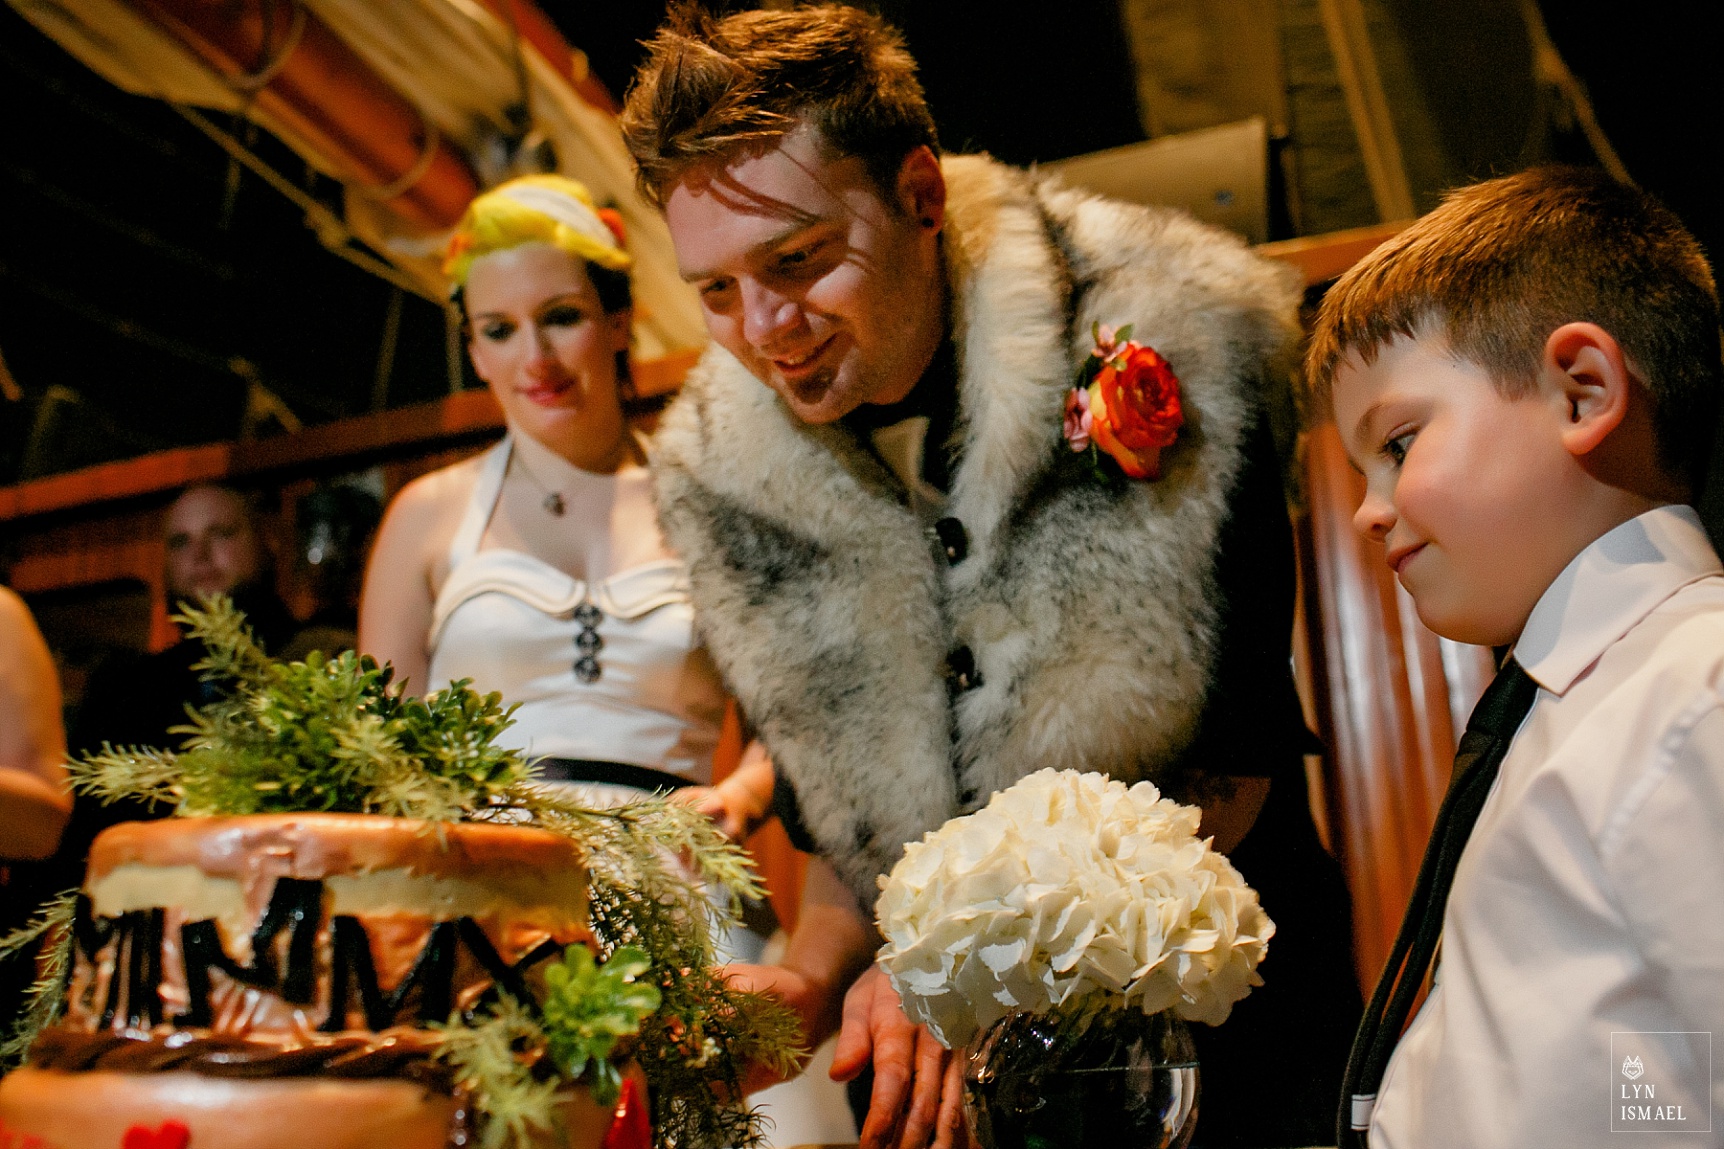 Ringbearer watches as the groom cuts their cake on their nautical themed wedding on the Empire Sandy tall ship based in Toronto.